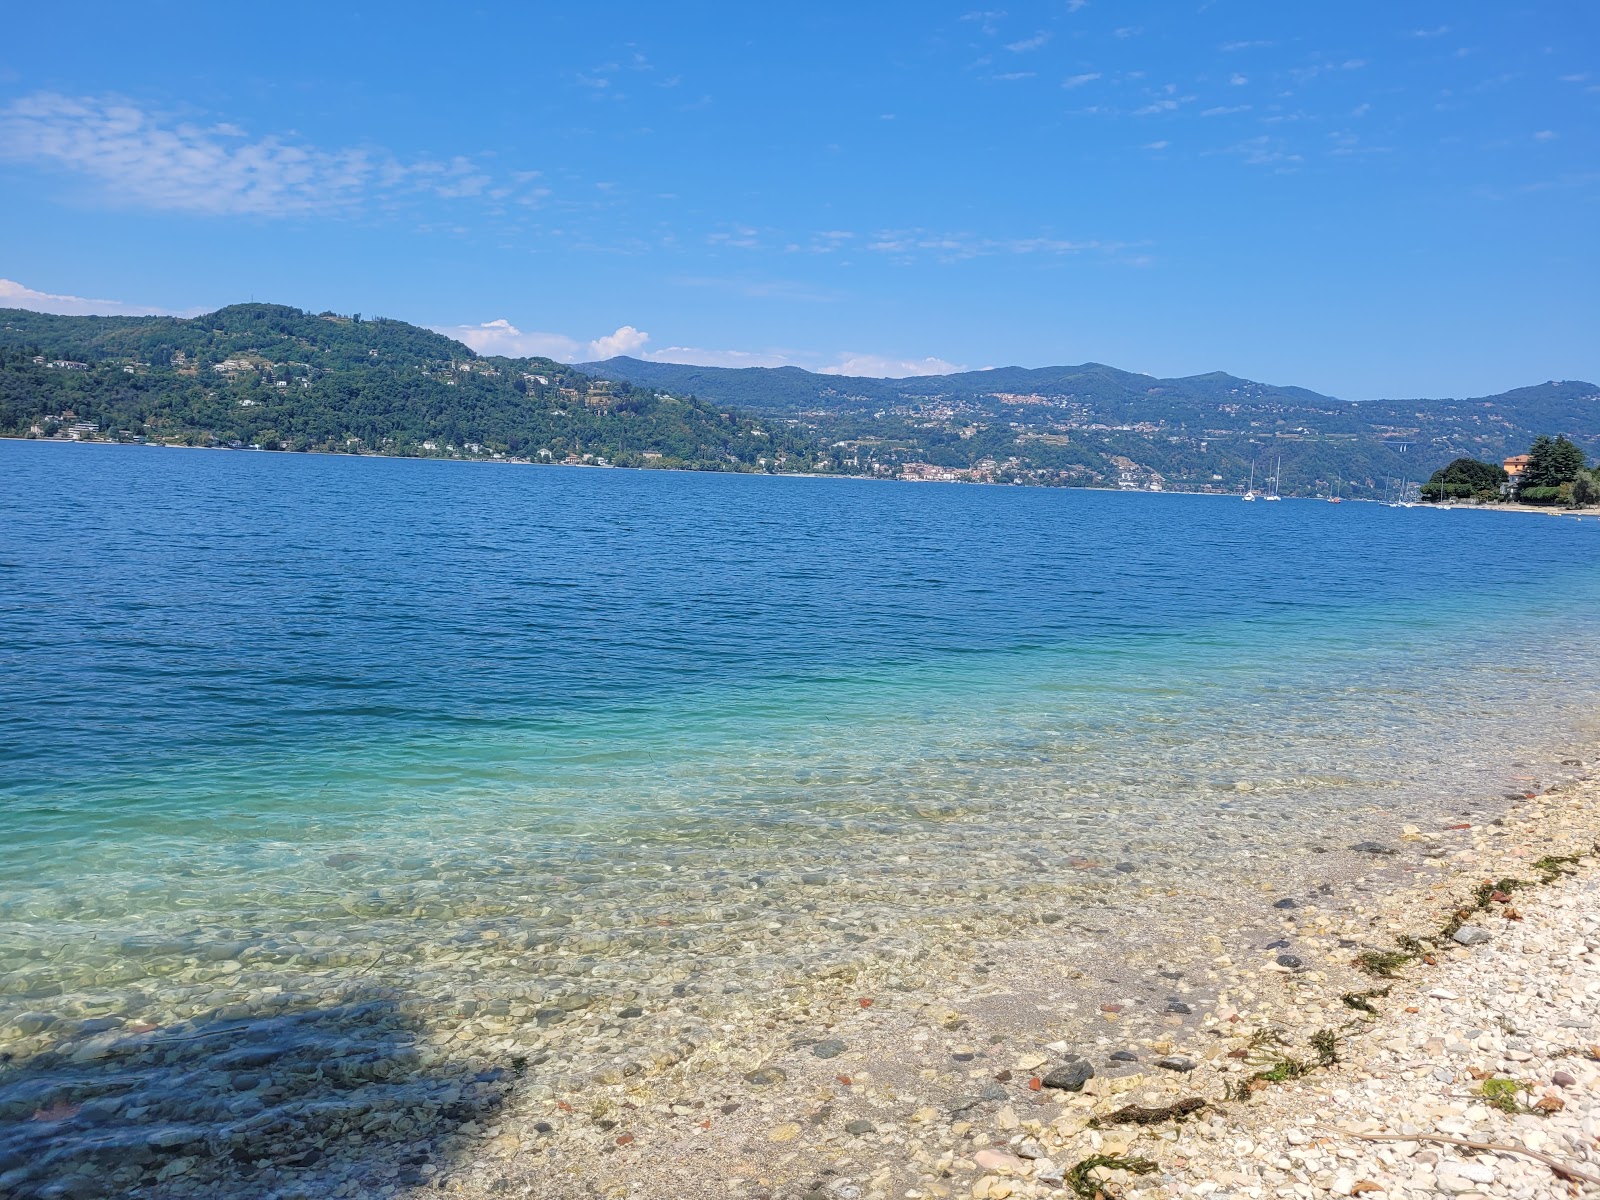 Photo of Spiaggia libera di Angera with turquoise pure water surface